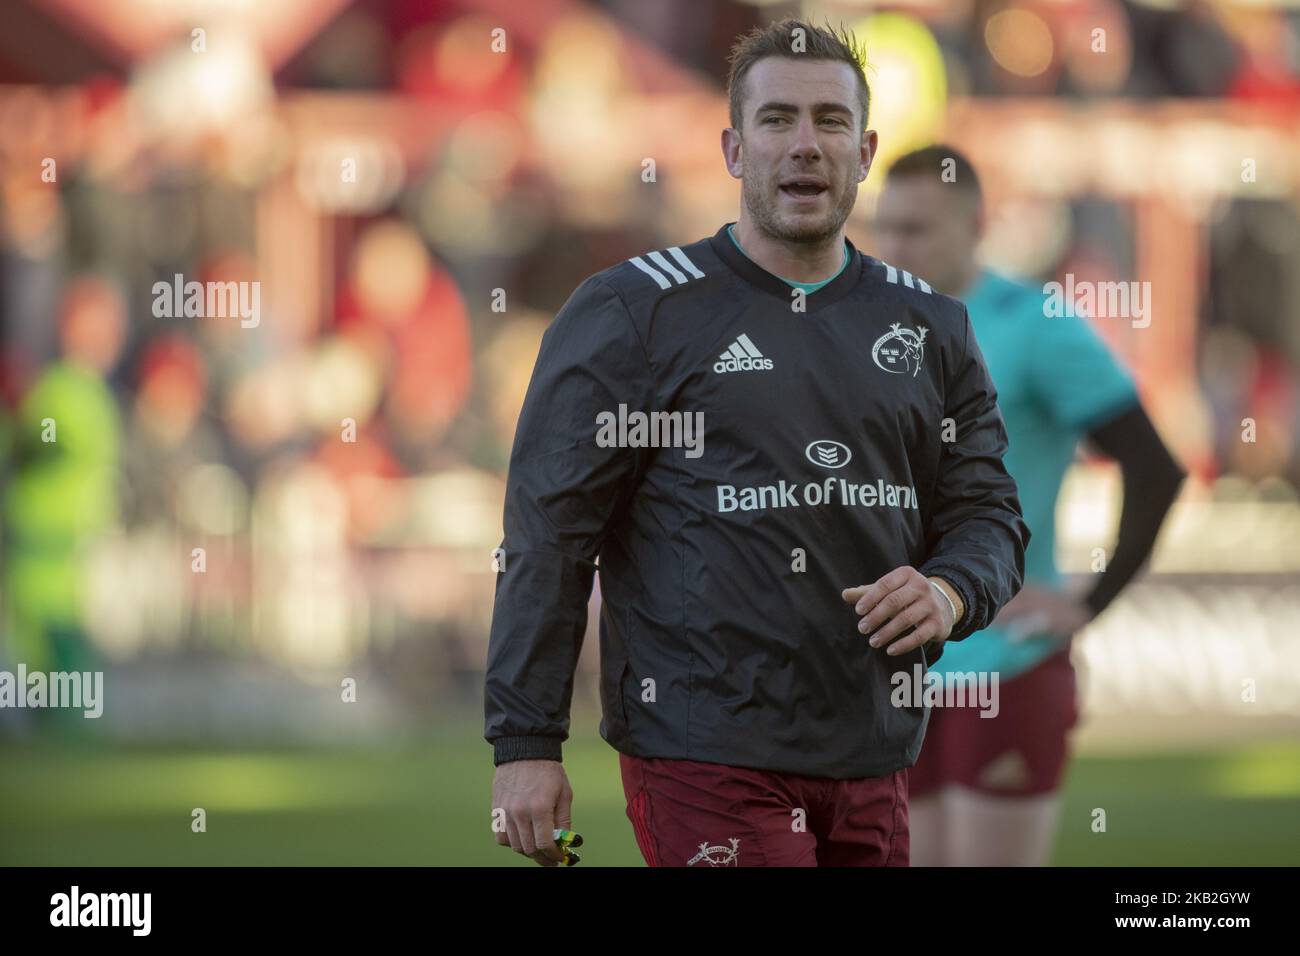 JJ Hanrahan of Munster pictured during the Guinness PRO14 match between Munster Rugby and Glasgow Warriors at Thomond Park Stadium in Limerick, Ireland on October 27, 2018 (Photo by Andrew Surma/NurPhoto) Stock Photo